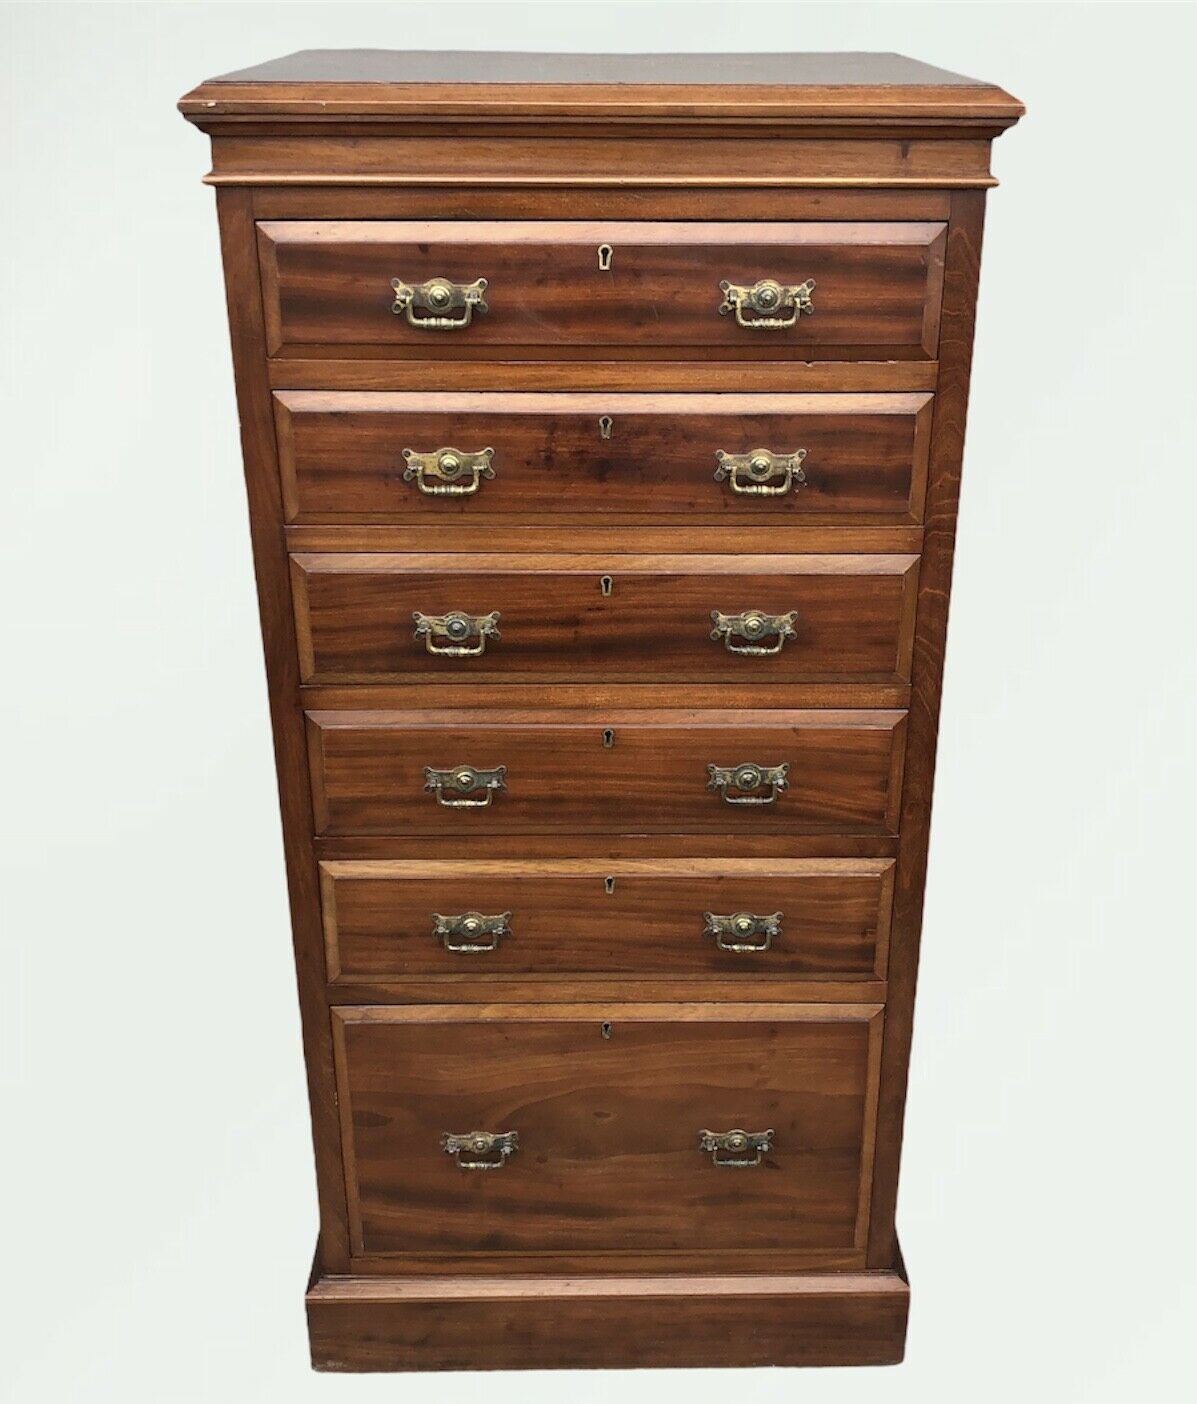 Handsome Antique Solid Walnut Tallboy Chest Of Drawers ( SOLD )